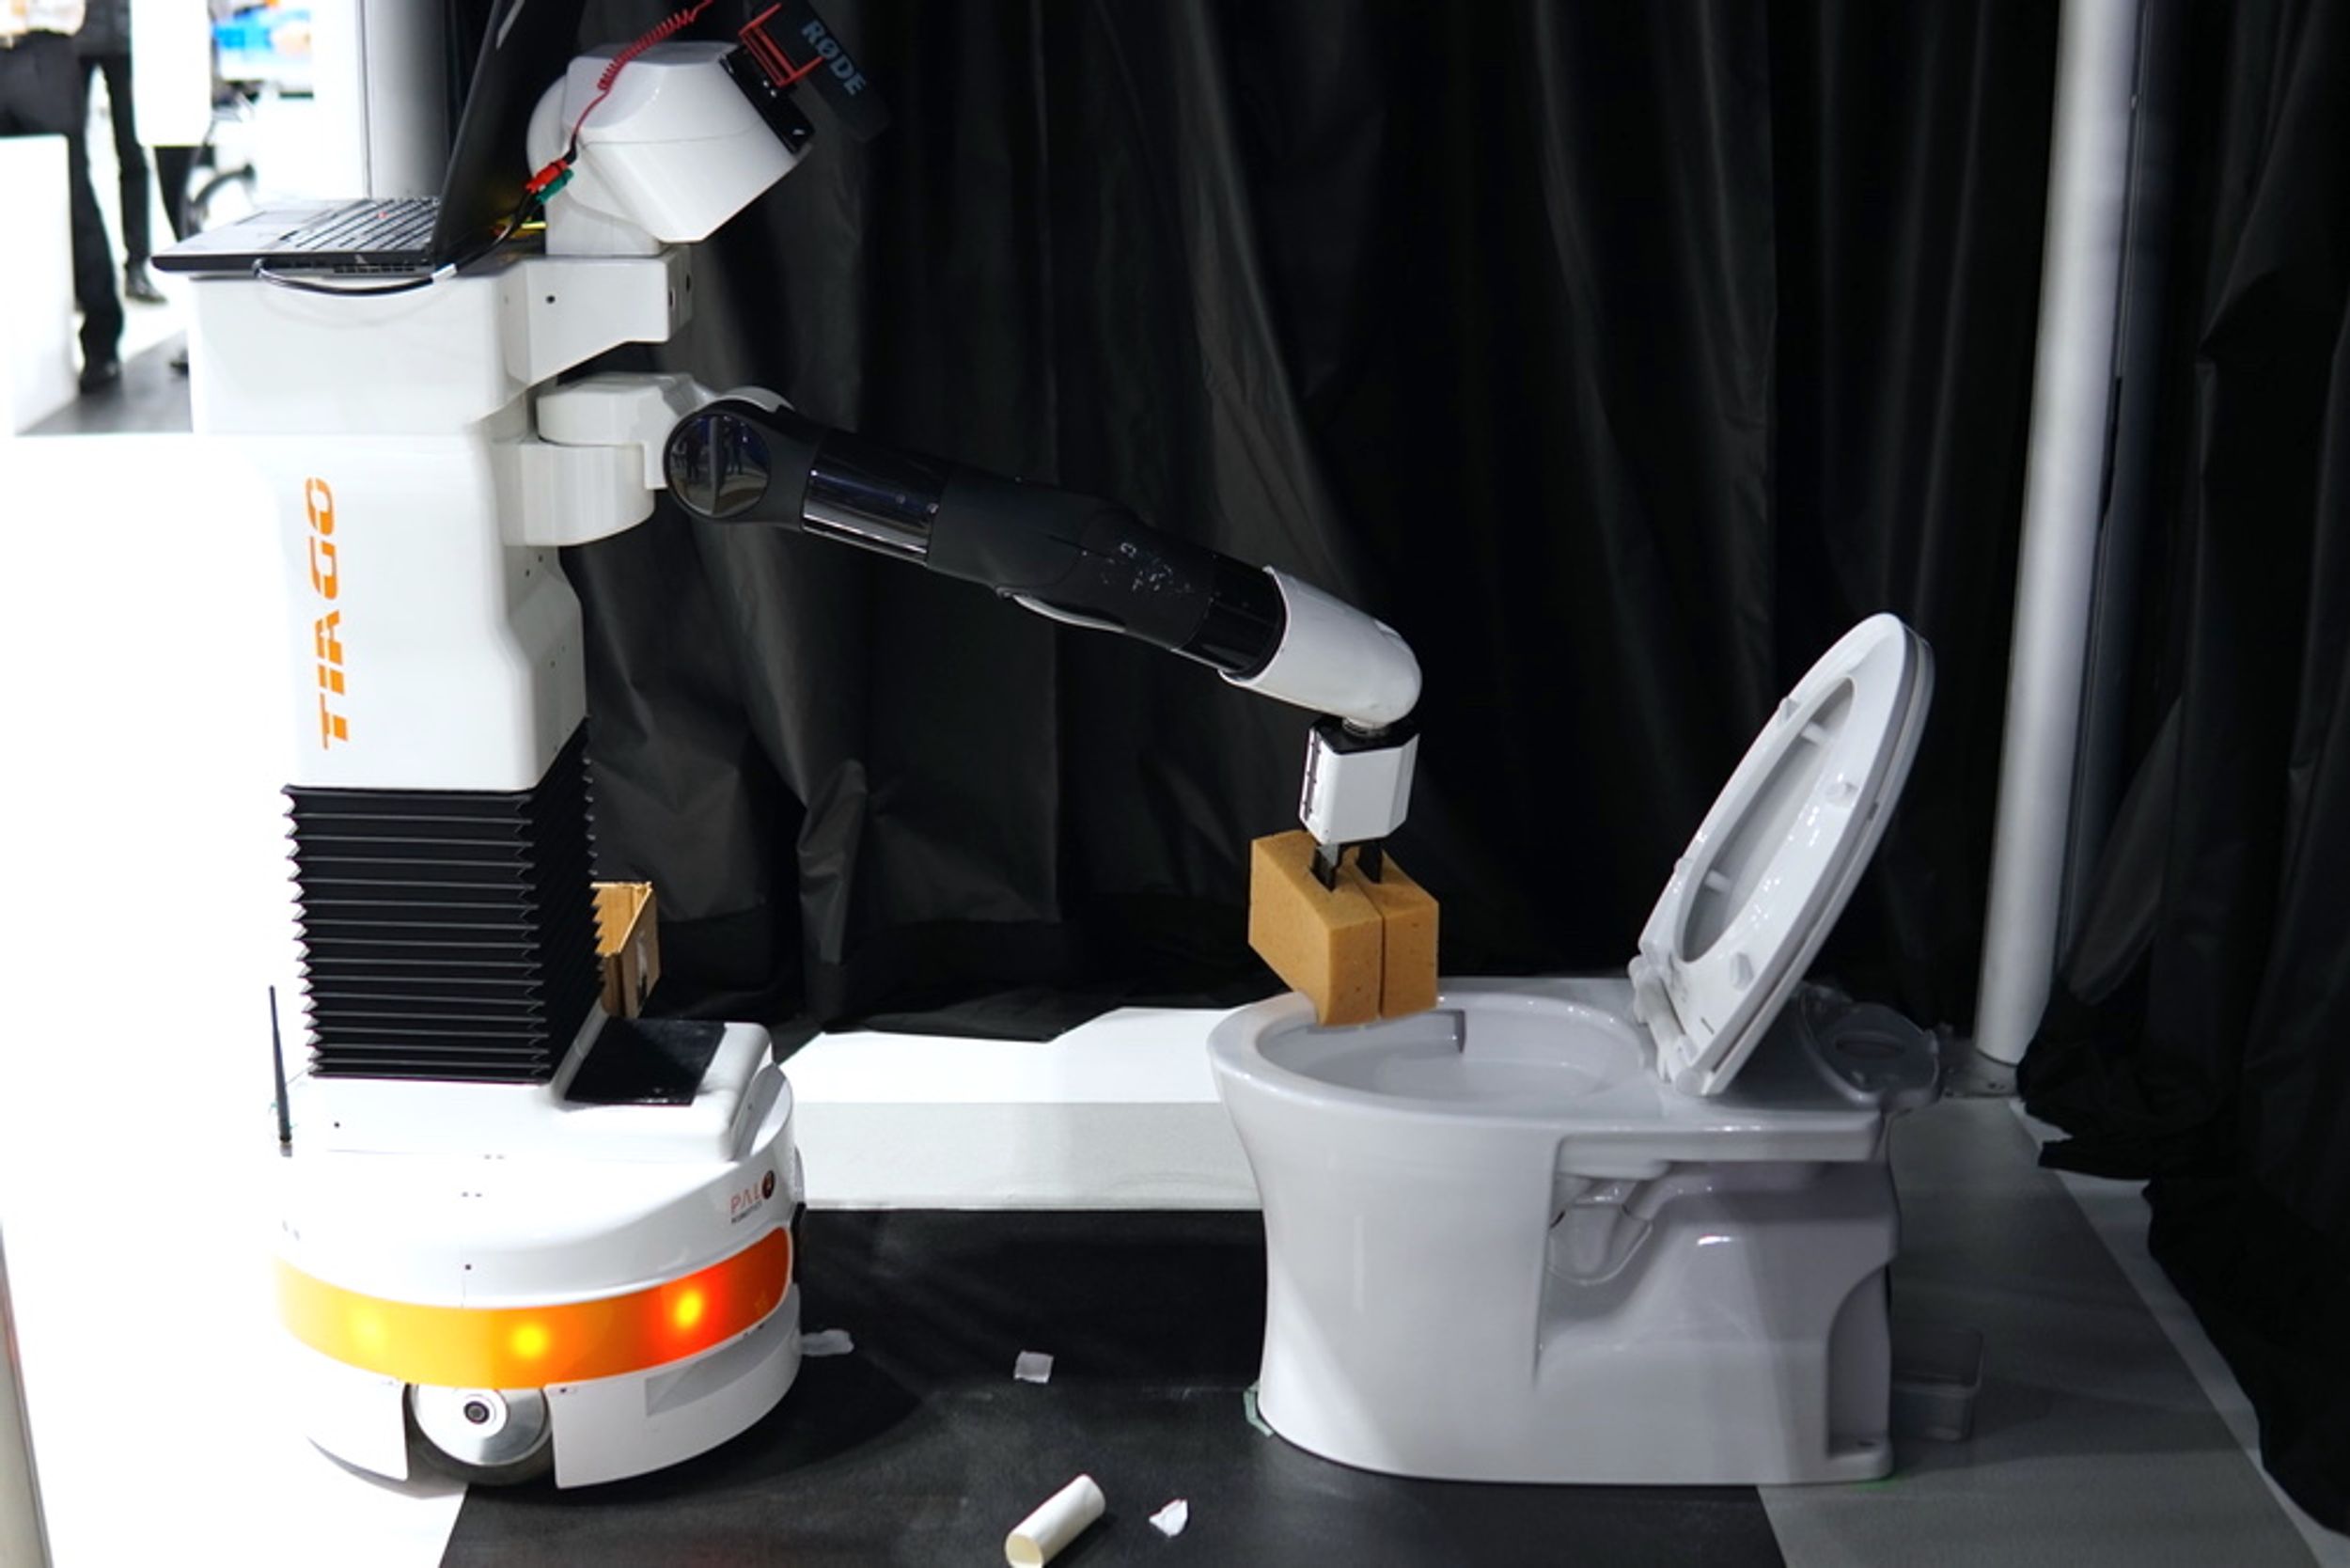 Team Homer teaches TIAGo to autonomously clean a toilet, and it's about time